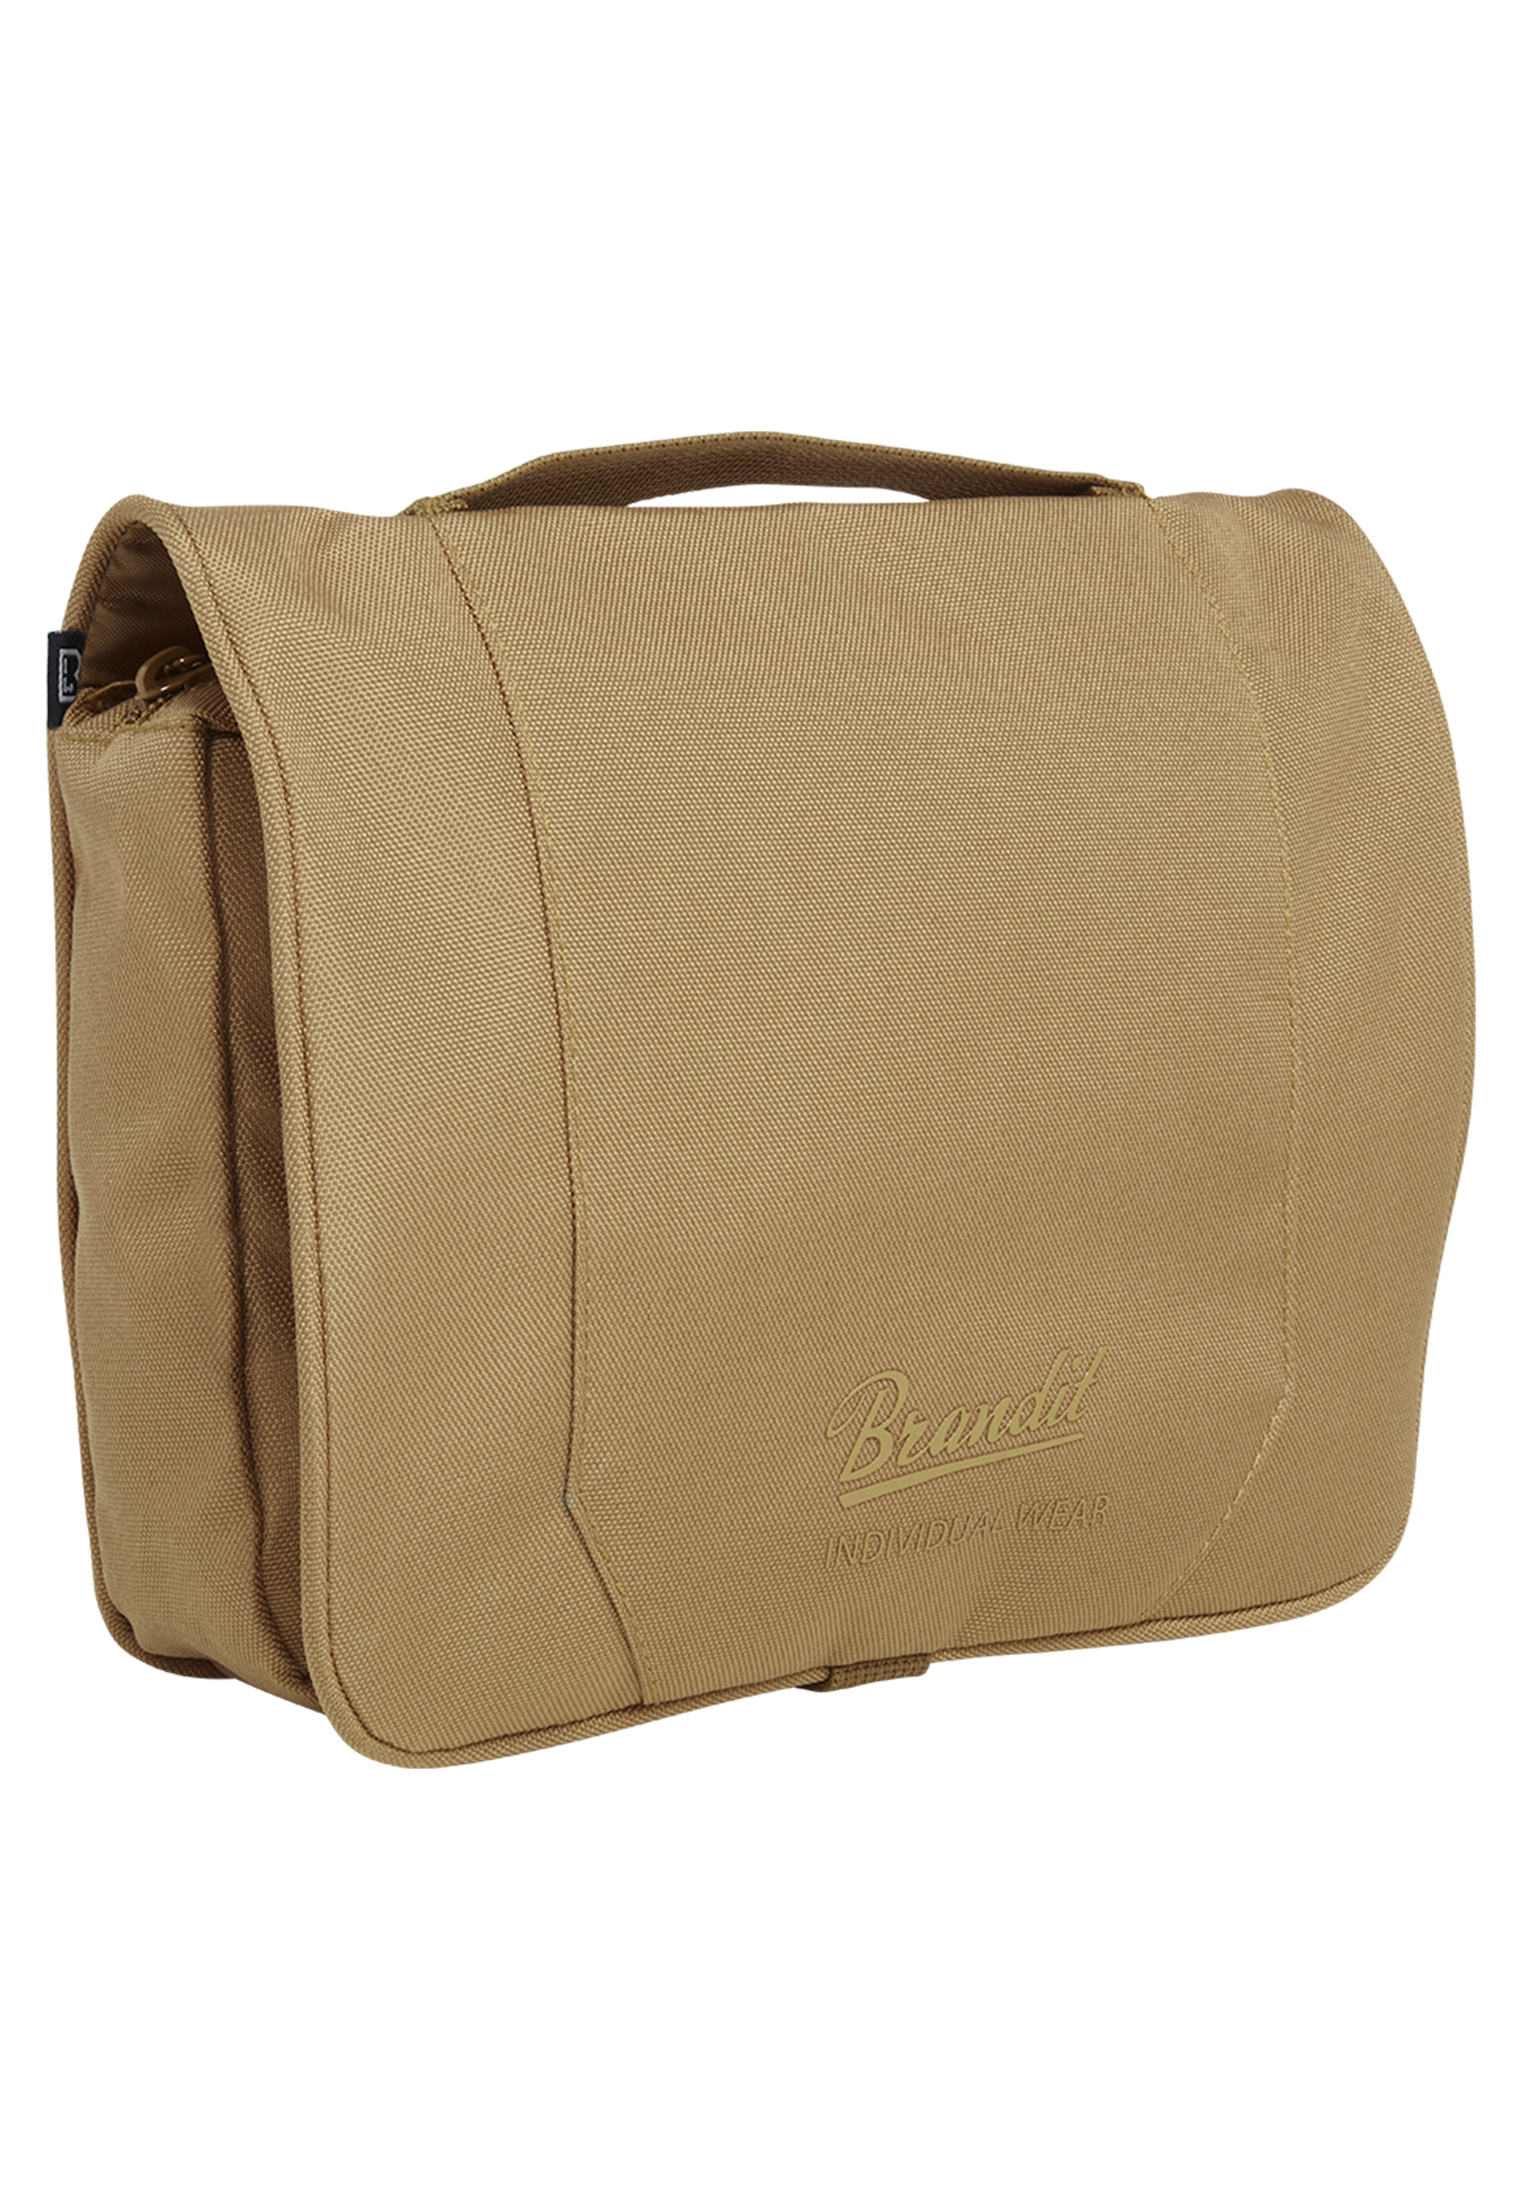 Taschen Toiletry Bag large in Farbe camel